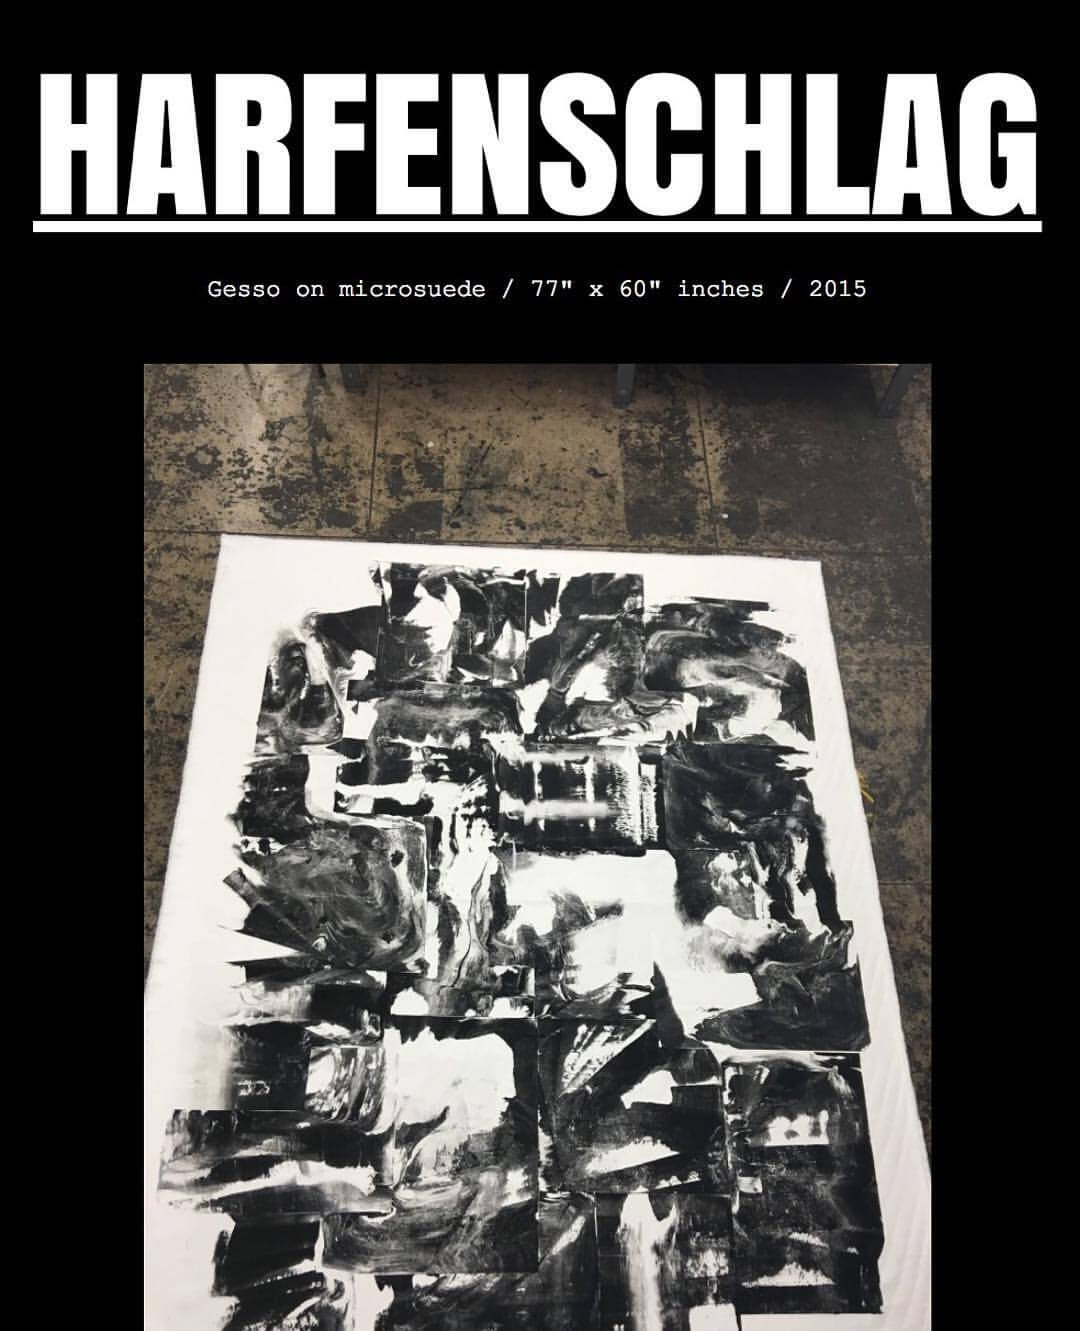 HARFENSCHLAG (website view) / Gesso on microsuede / 77” x 60” inches / 2015